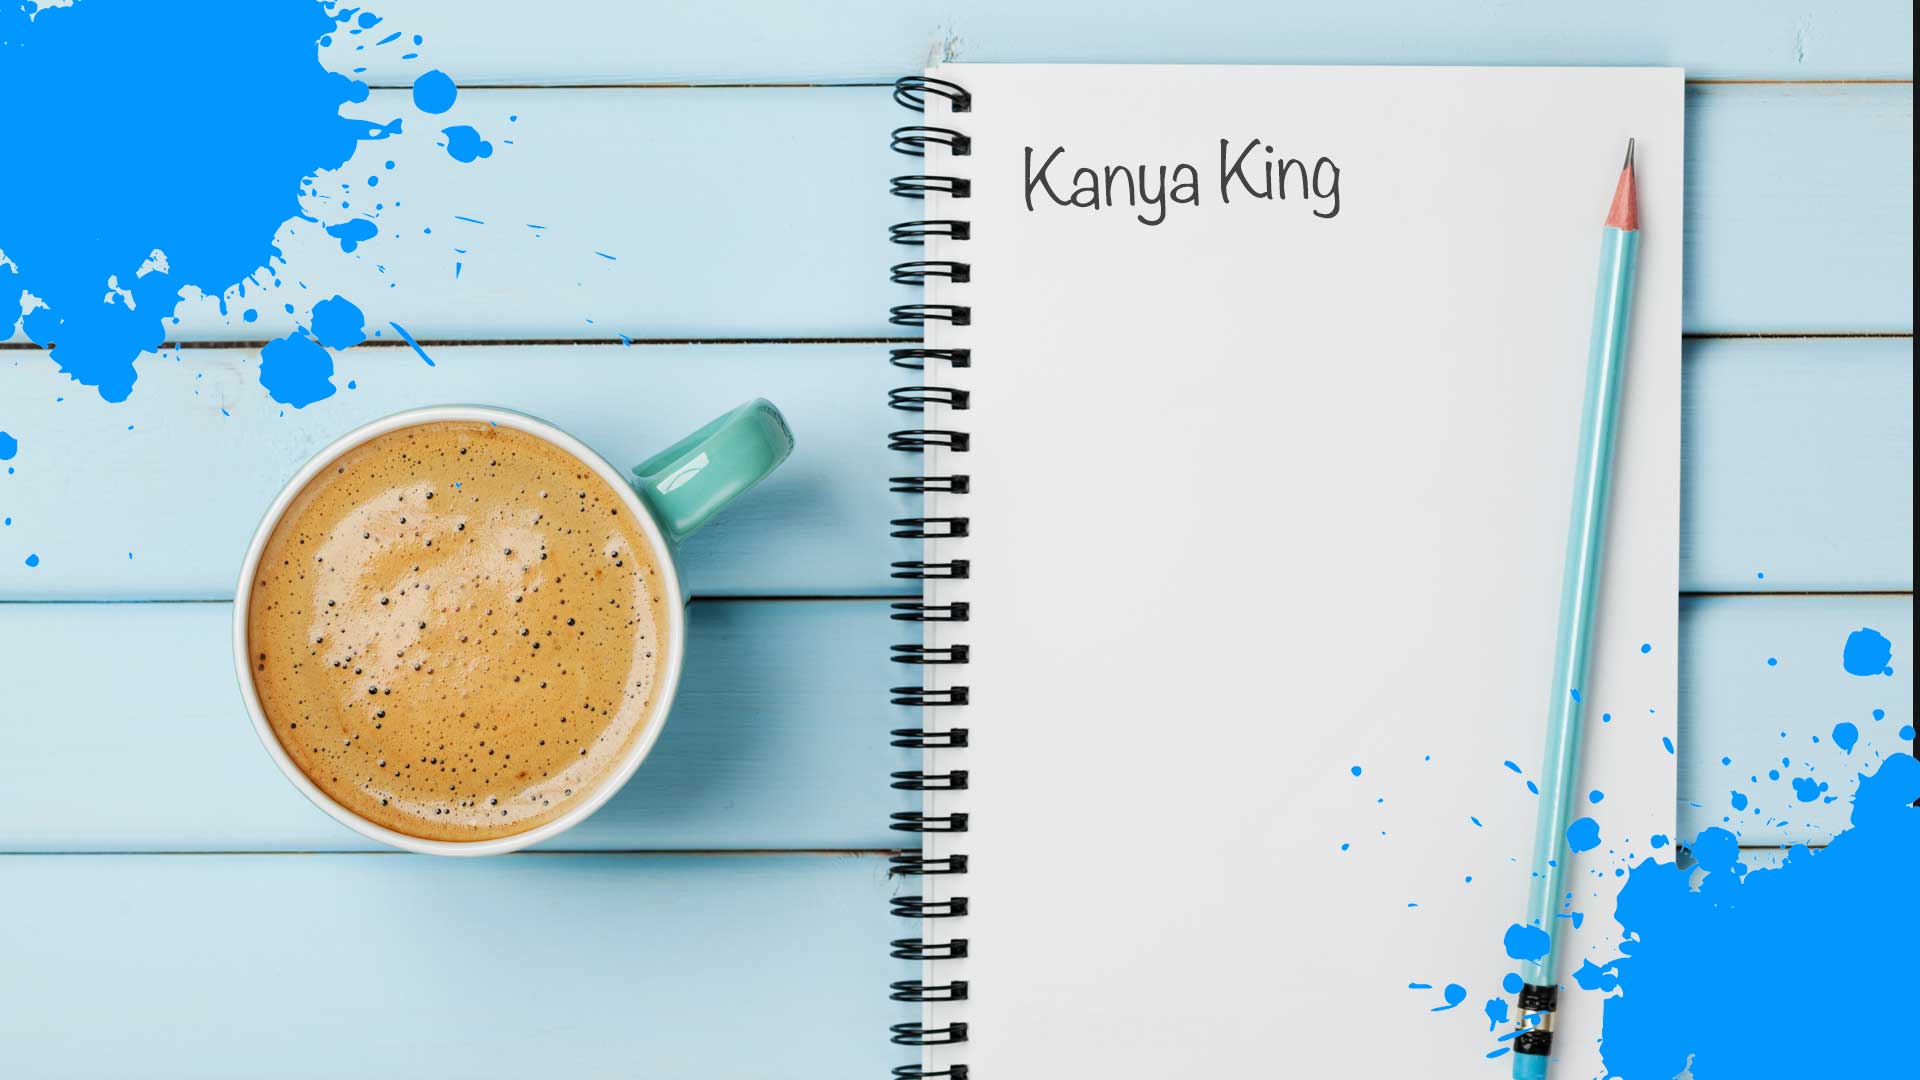 A note book with Kanya King's name in it